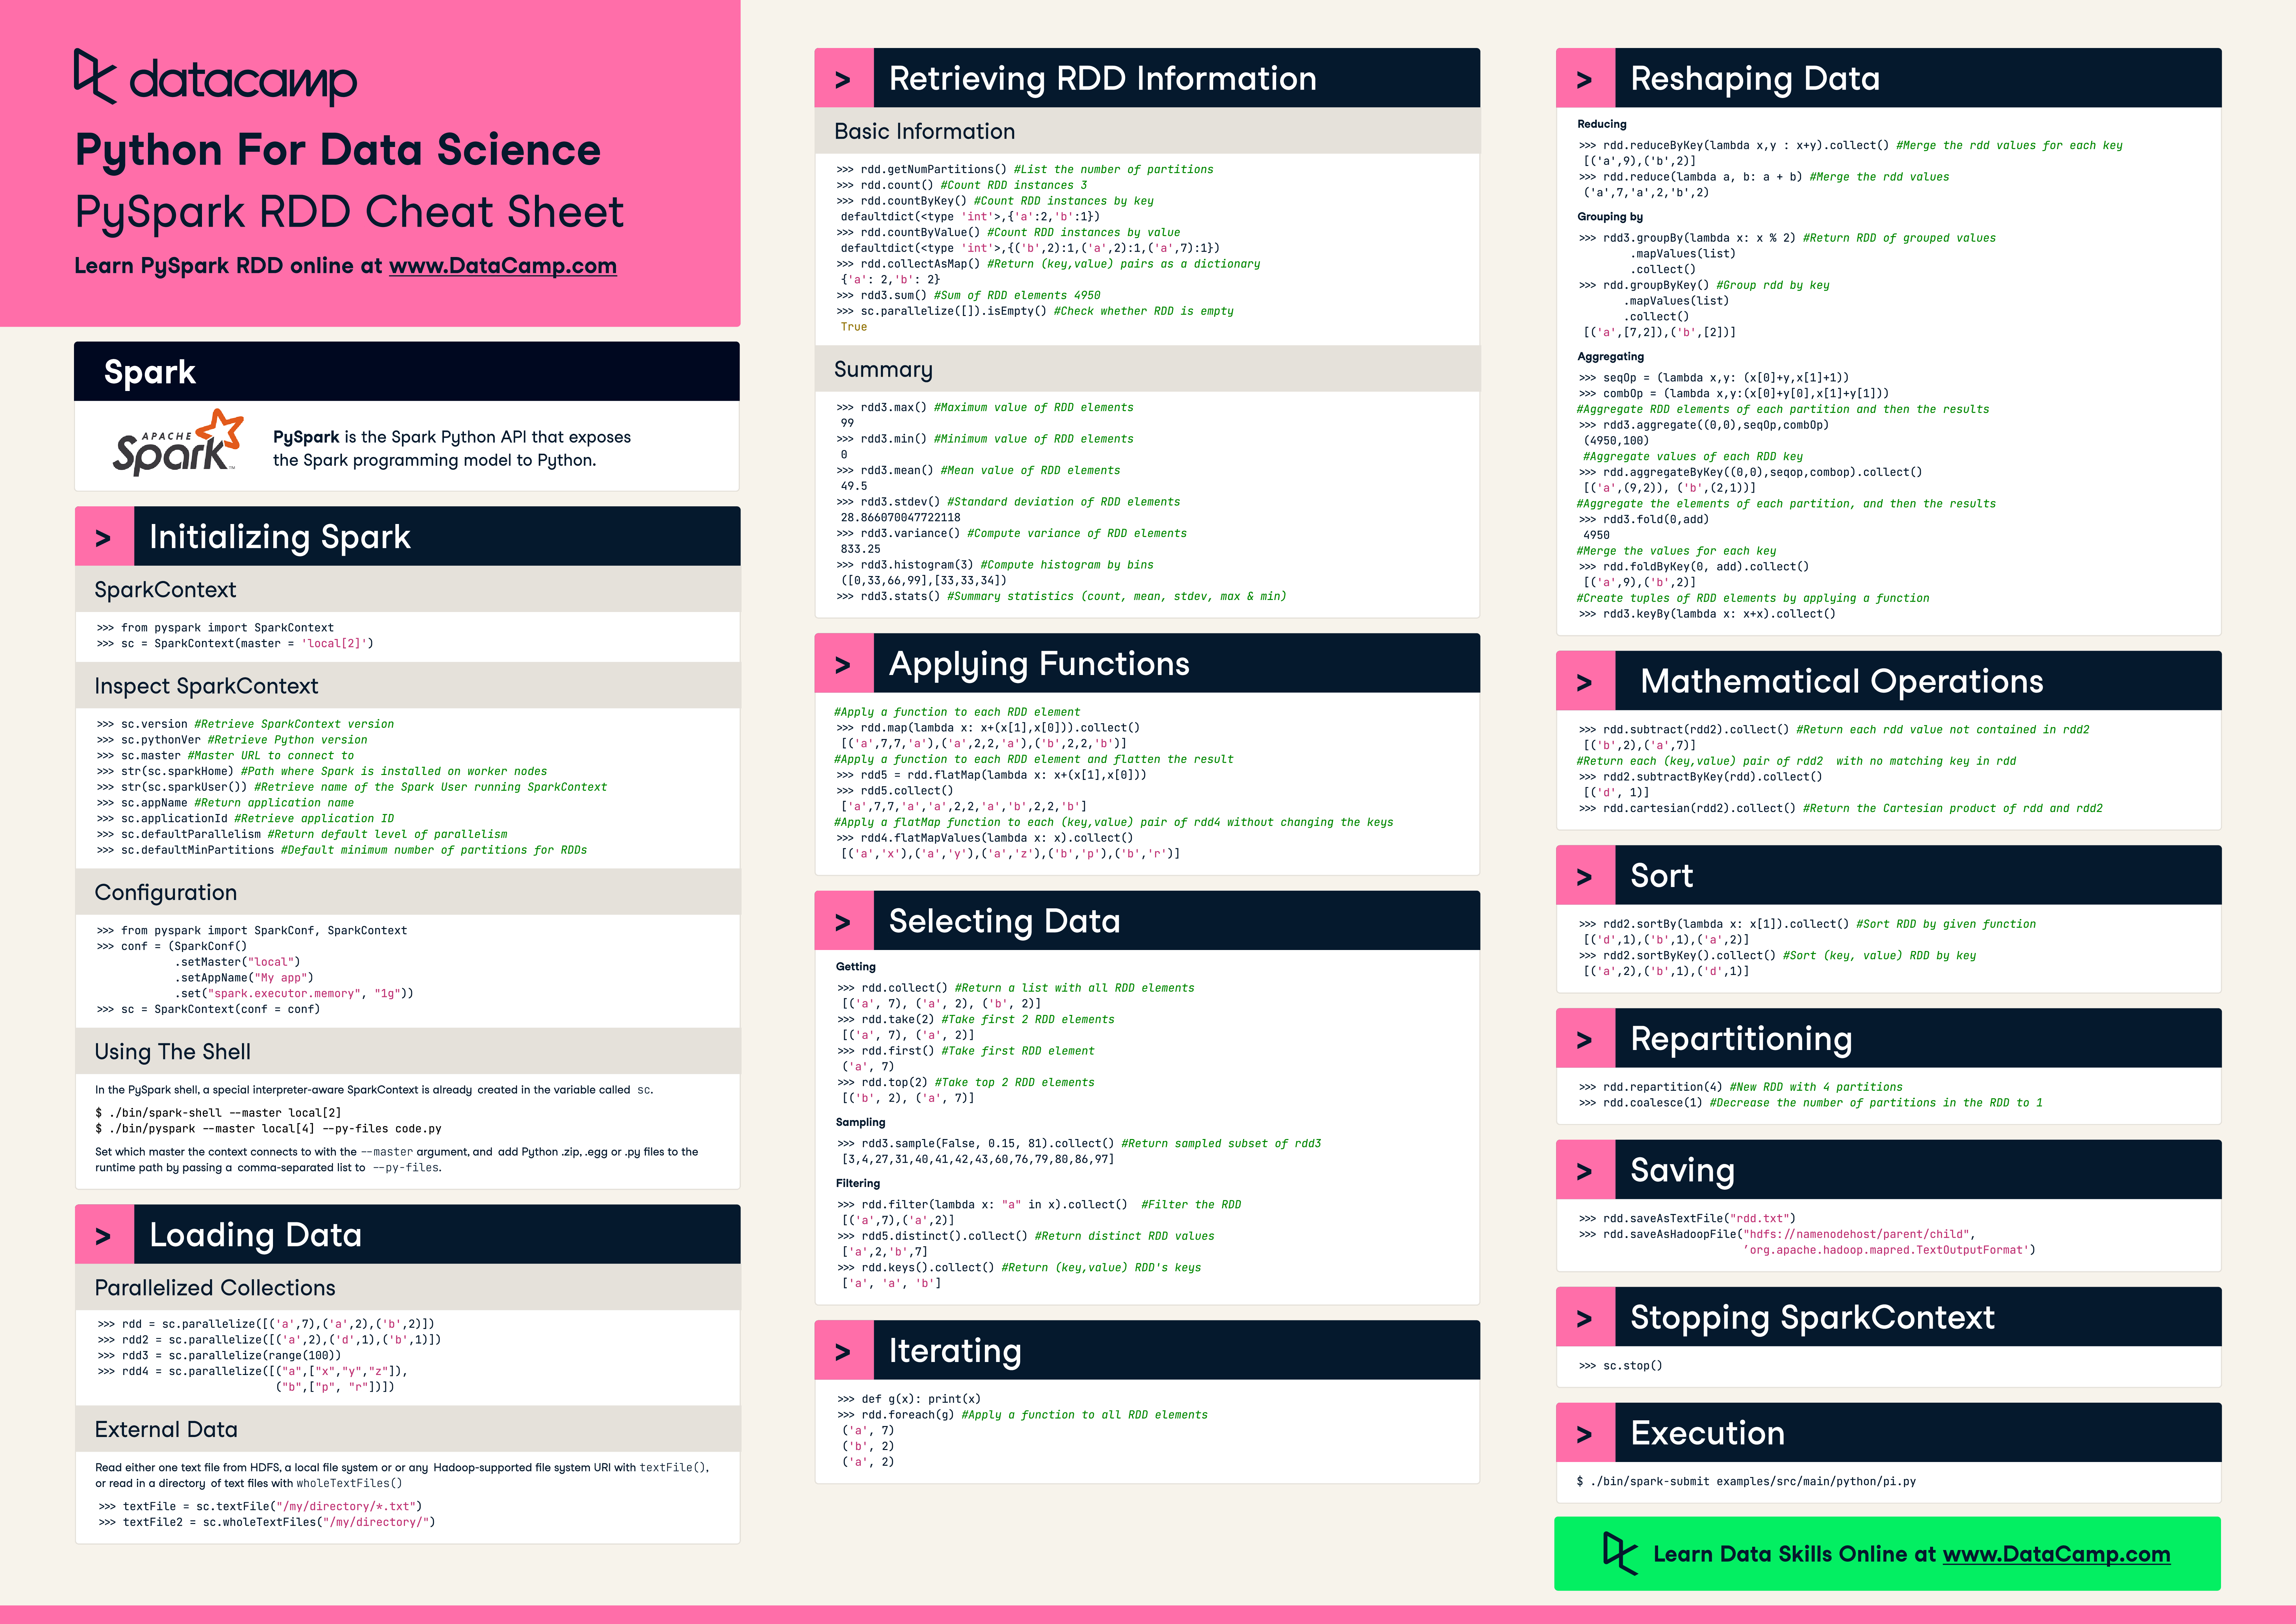 Python for Data Science Cheat Sheet PDF
